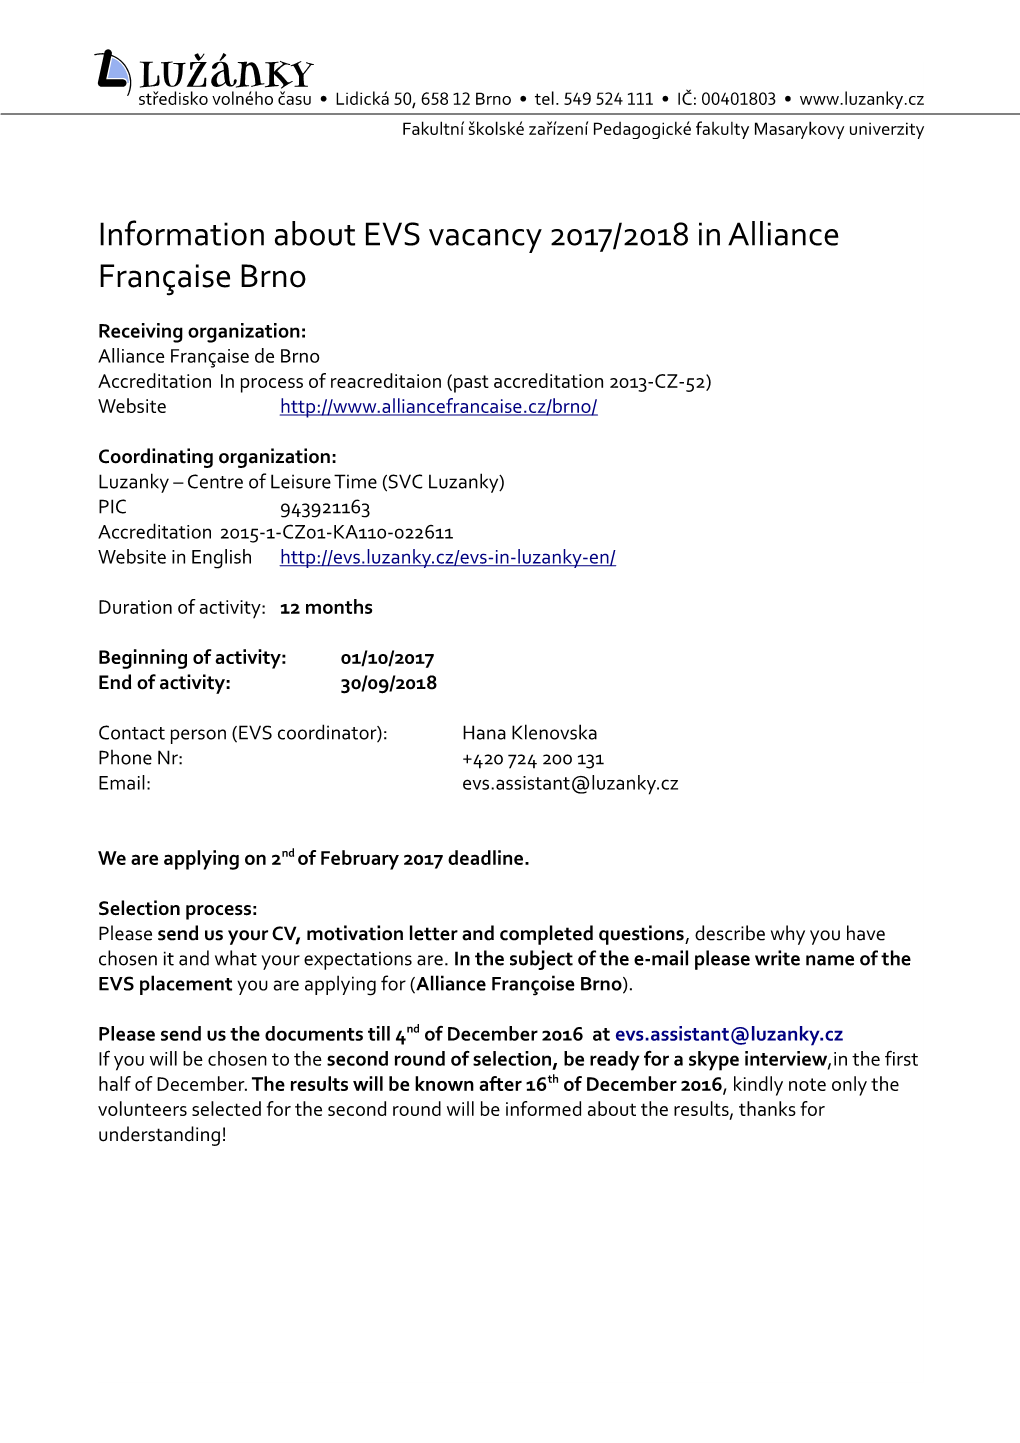 Information About EVS Vacancy 2017/2018 in Alliance Françaisebrno